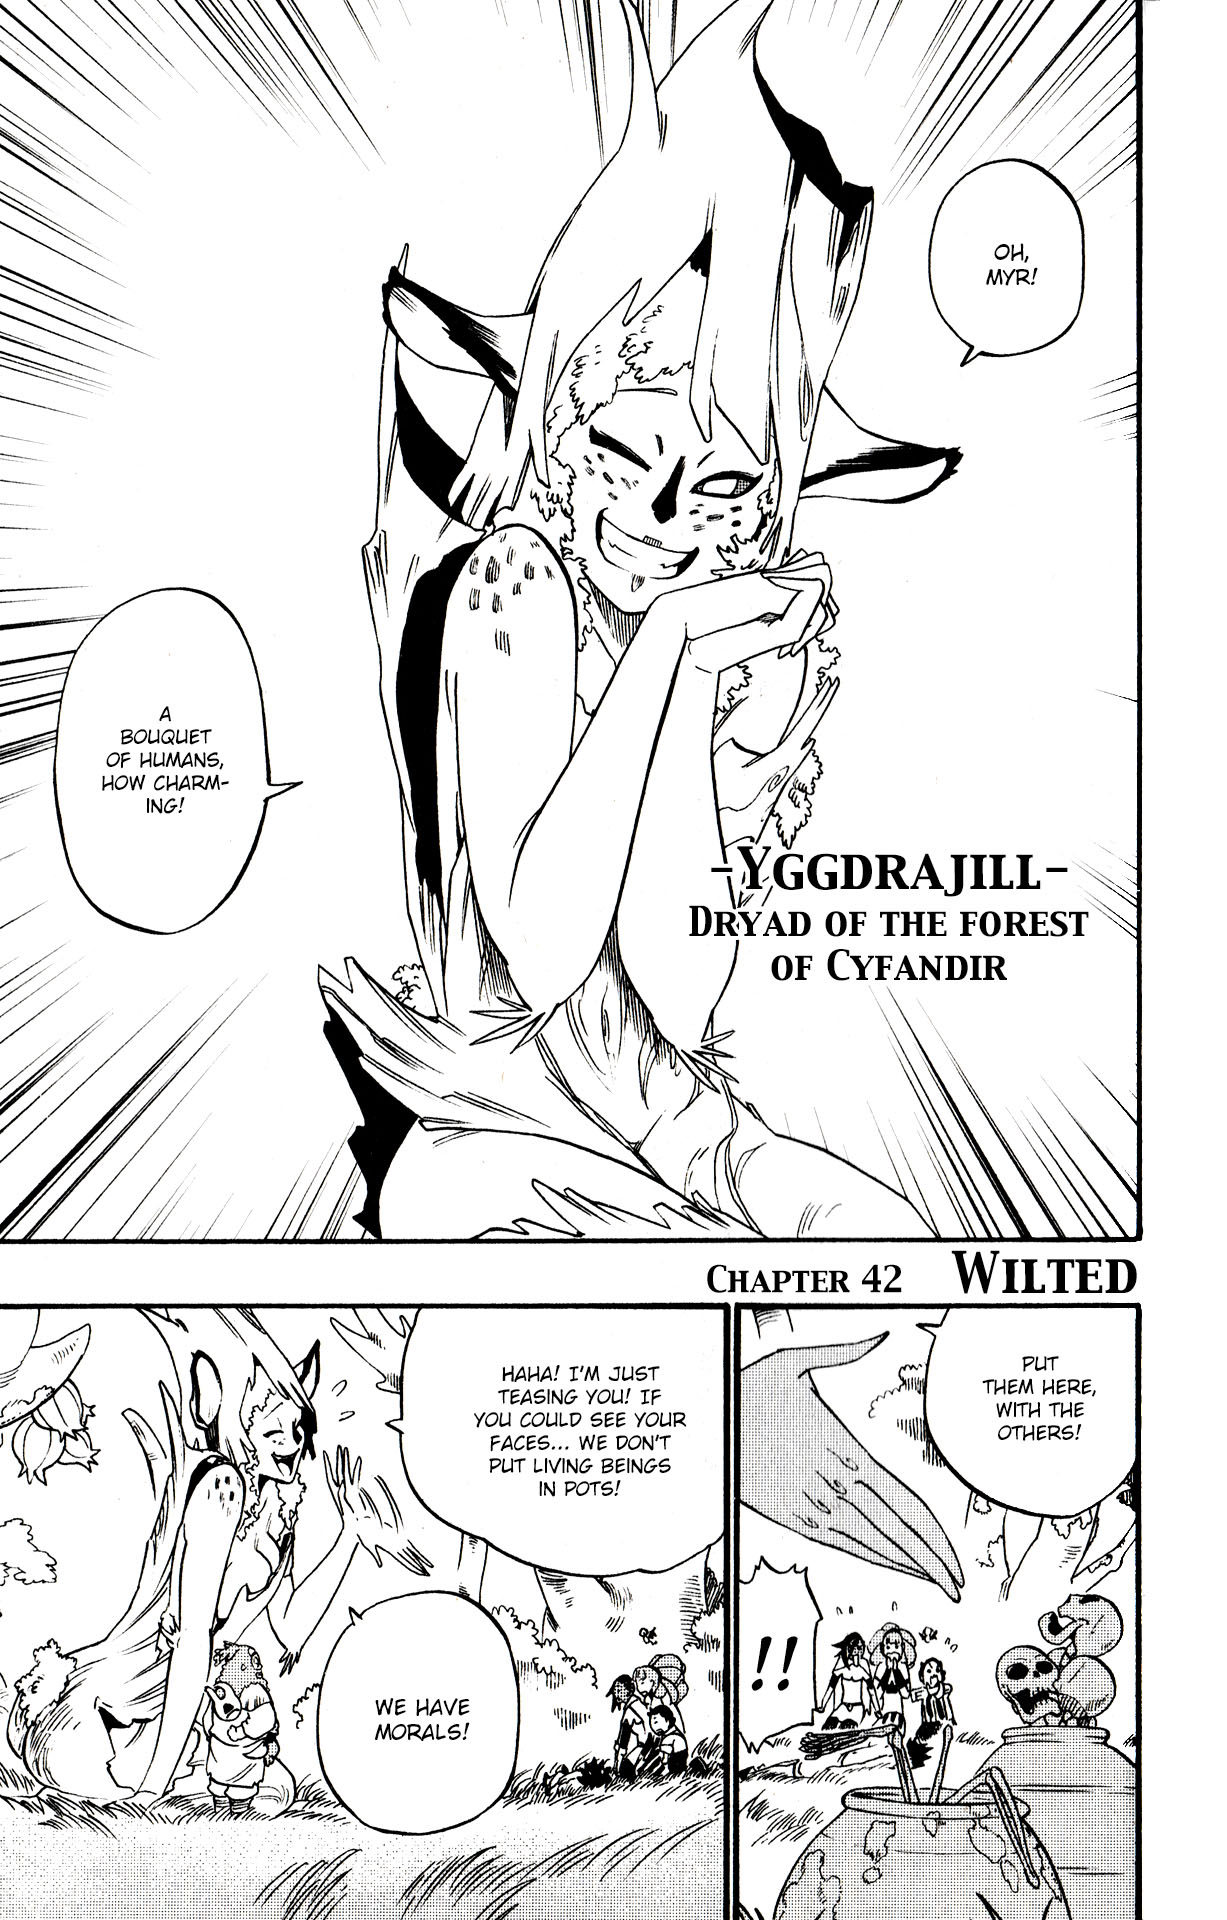 Radiant Vol. 6 Ch. 42 Wilted